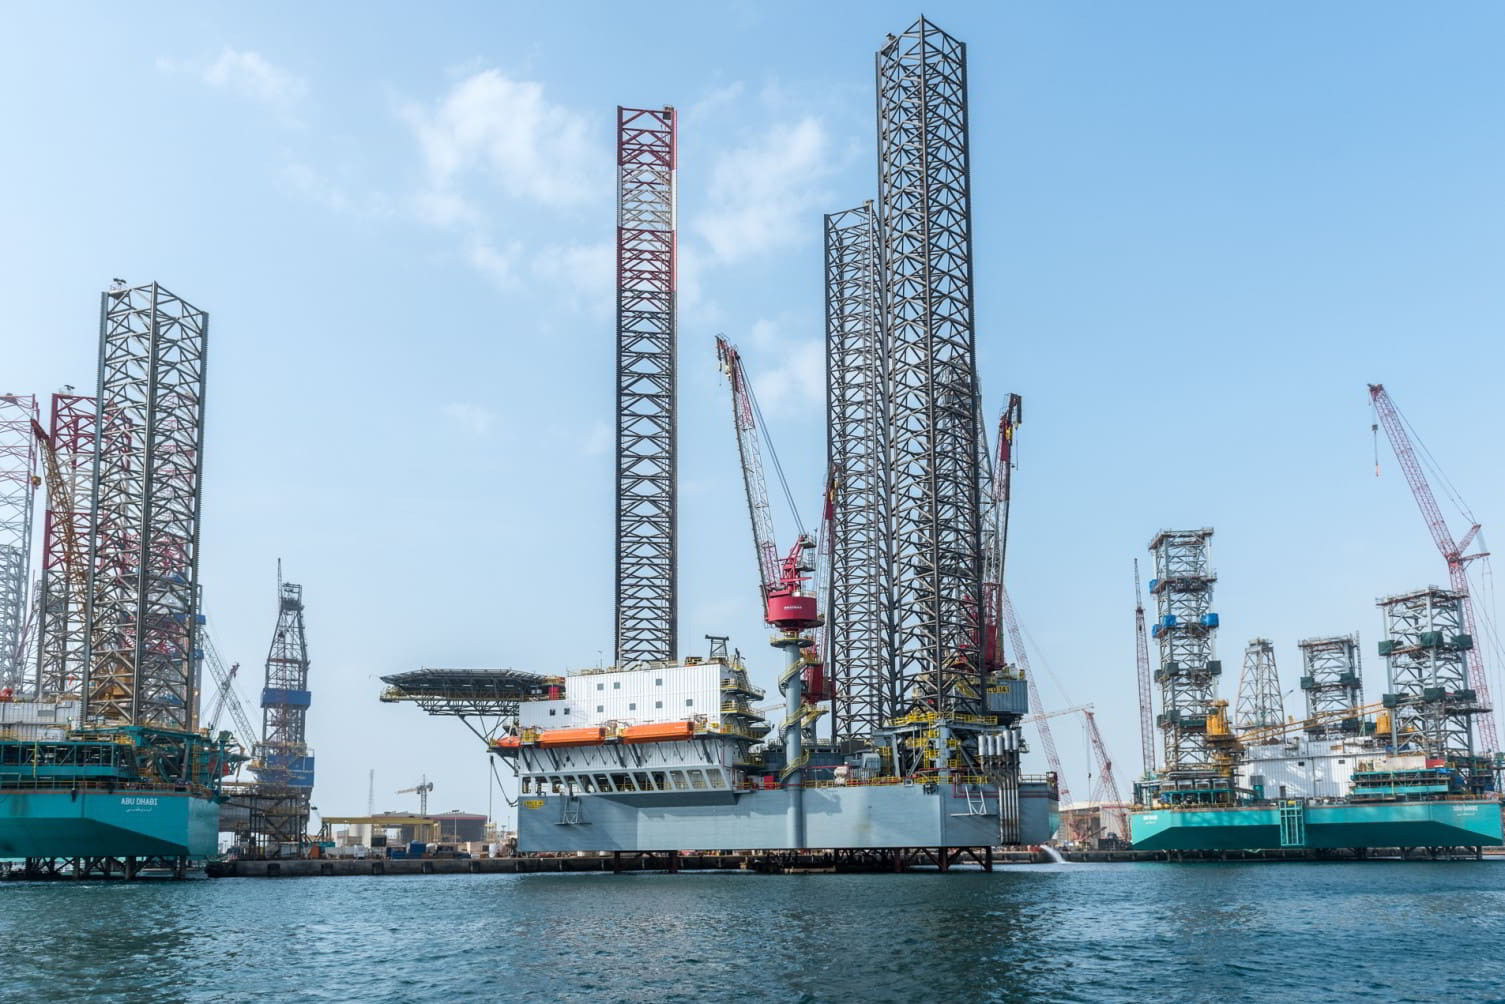 ARO’s 20-rig newbuild programme fires Valaris’ enthusiasm for growth prospects